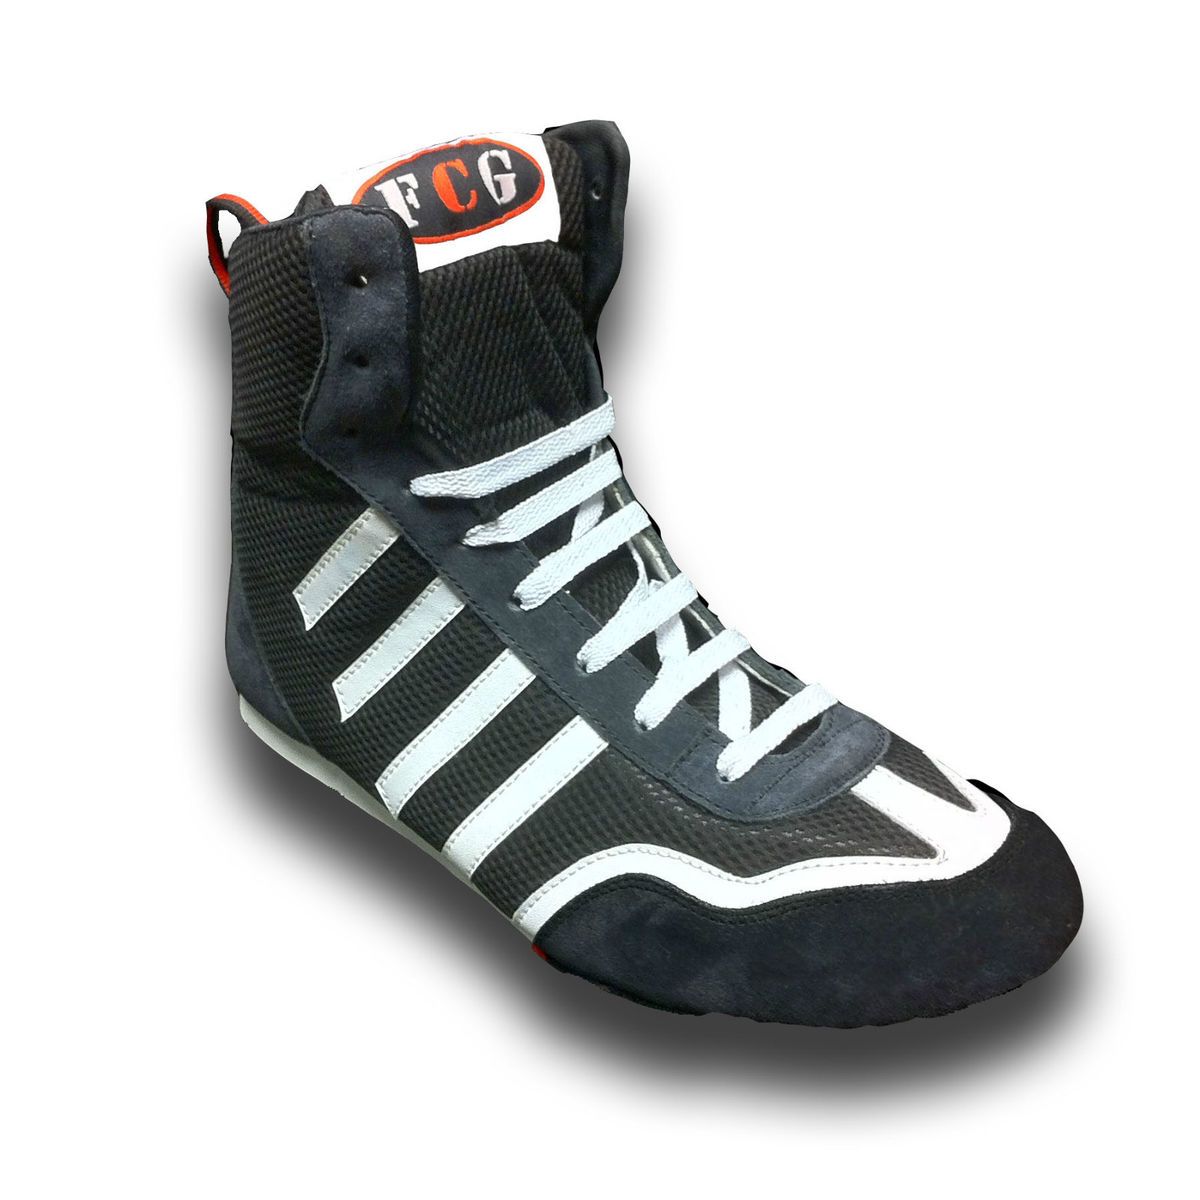   Black White Suede Synthetic Boxing Boots Kids Junior Childrens